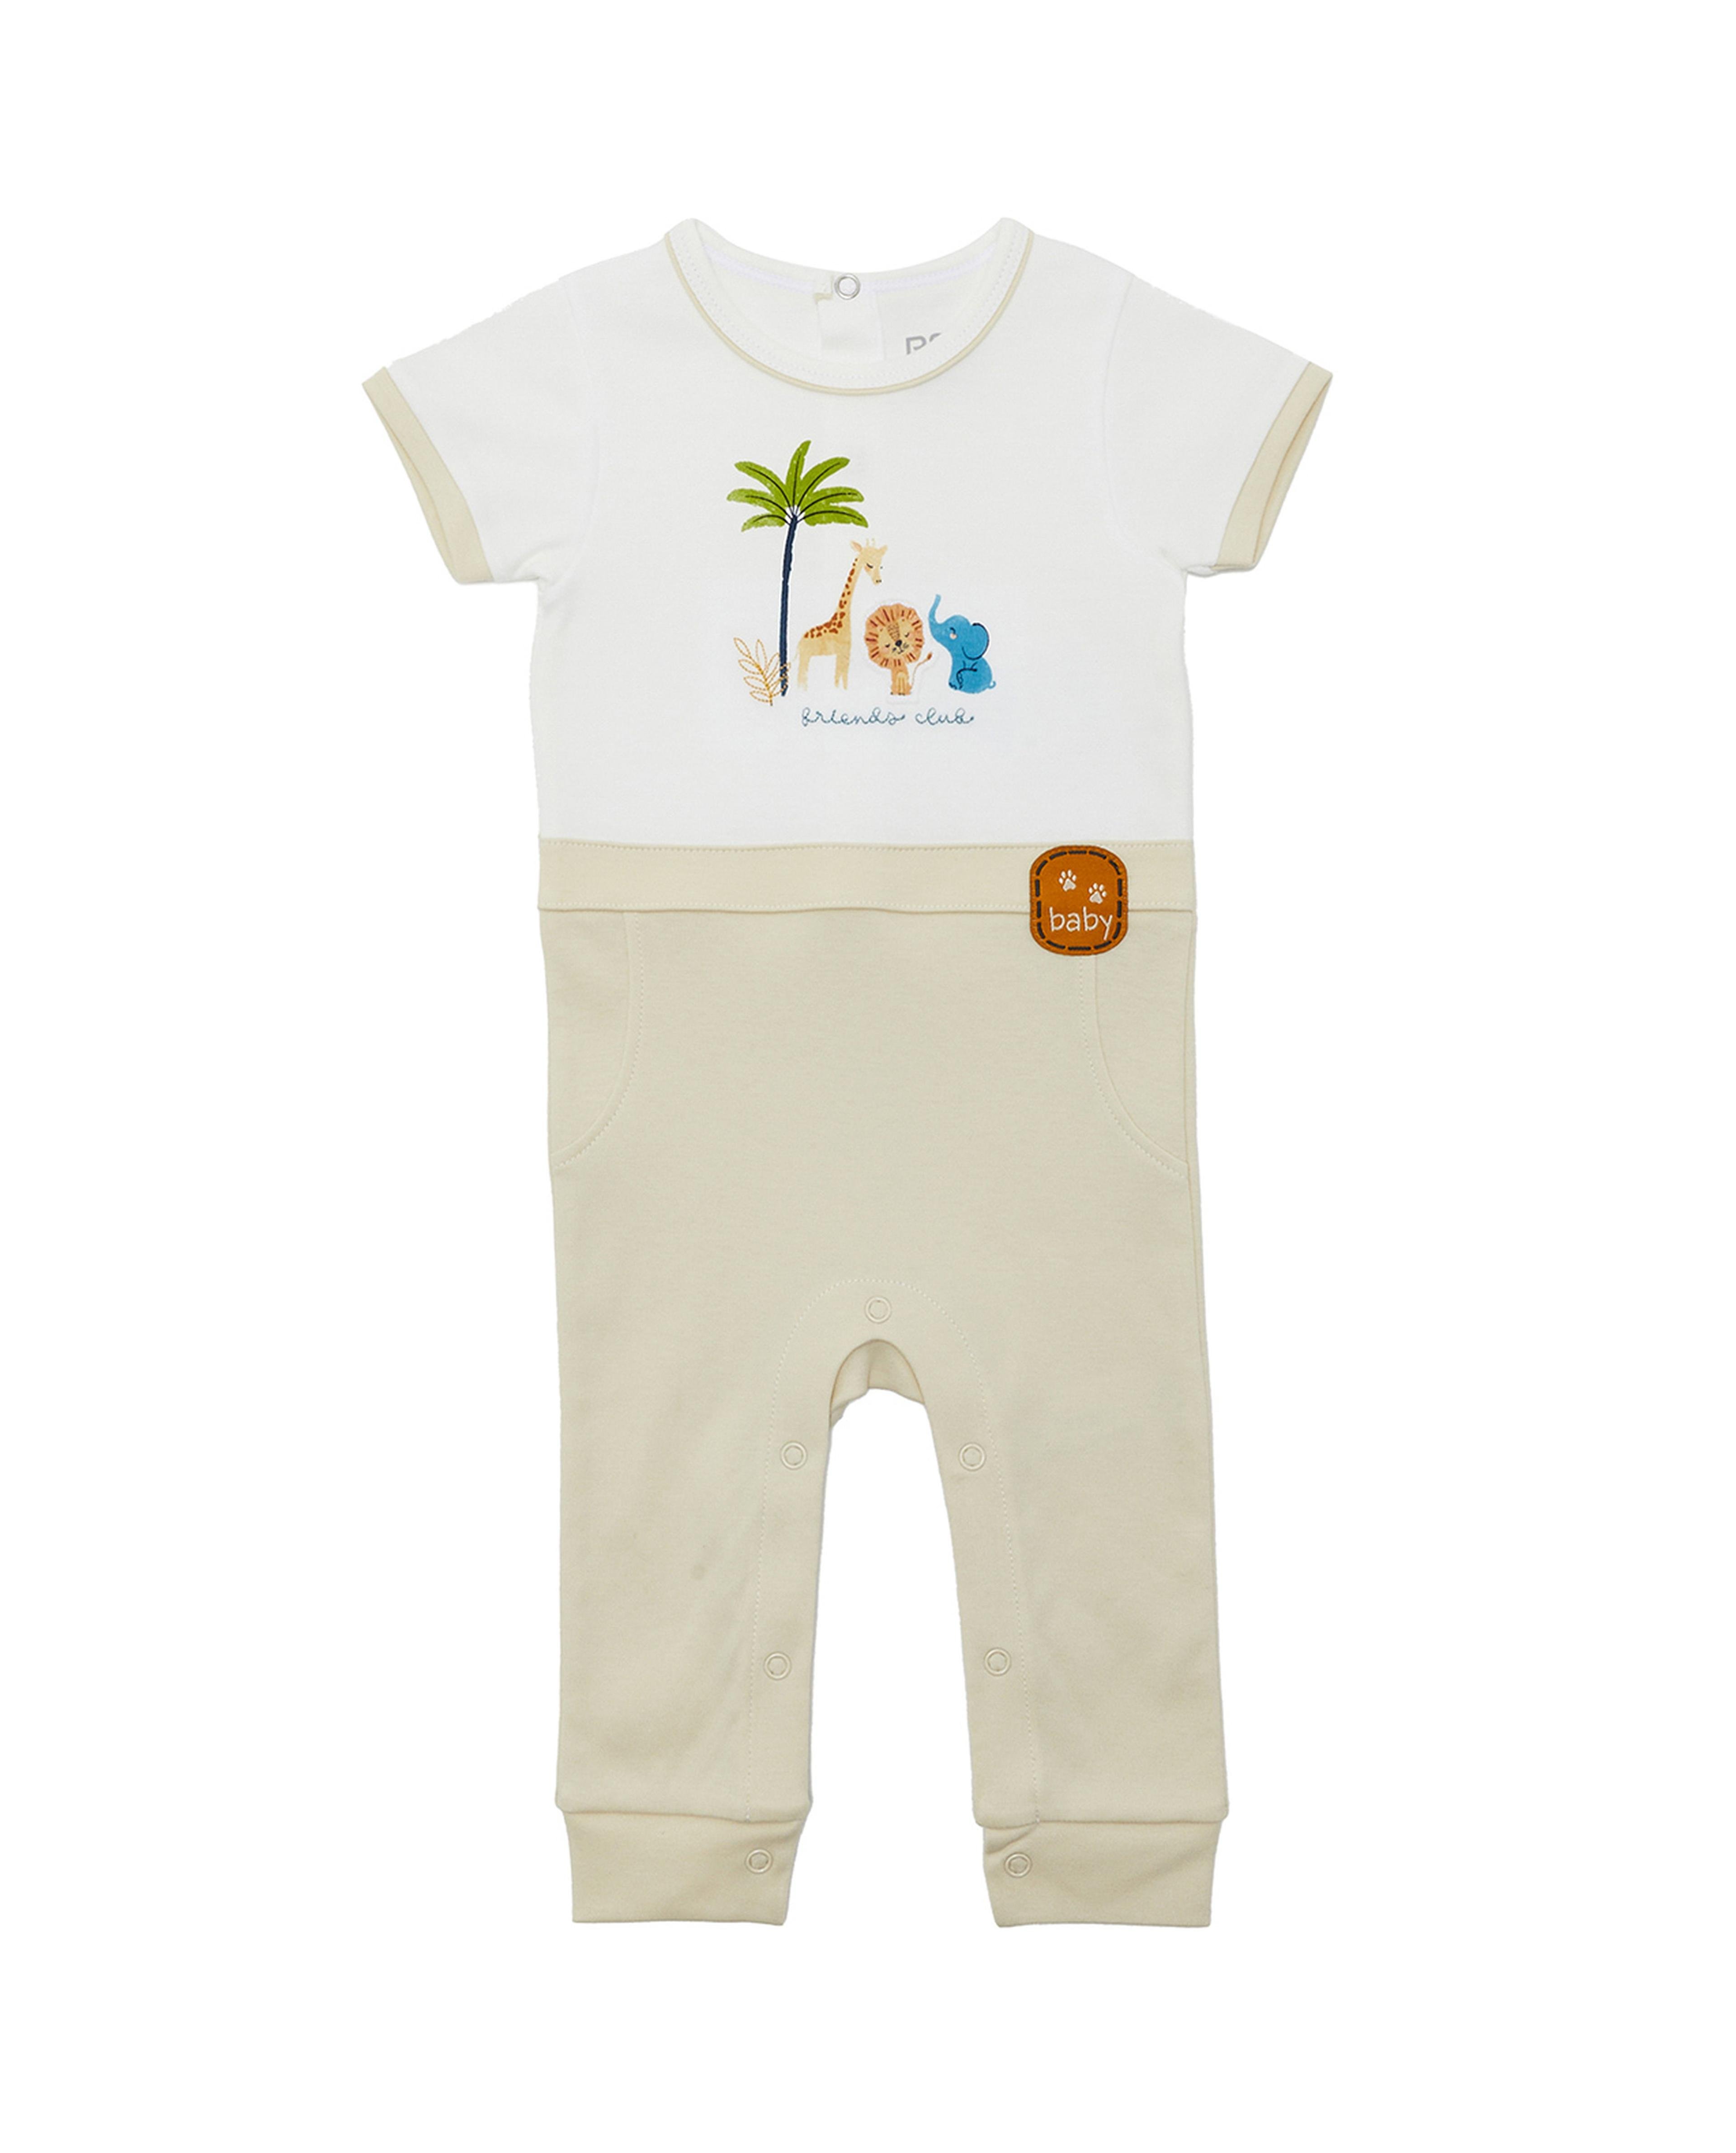 Printed Sleepsuit with Crew Neck and Short Sleeves